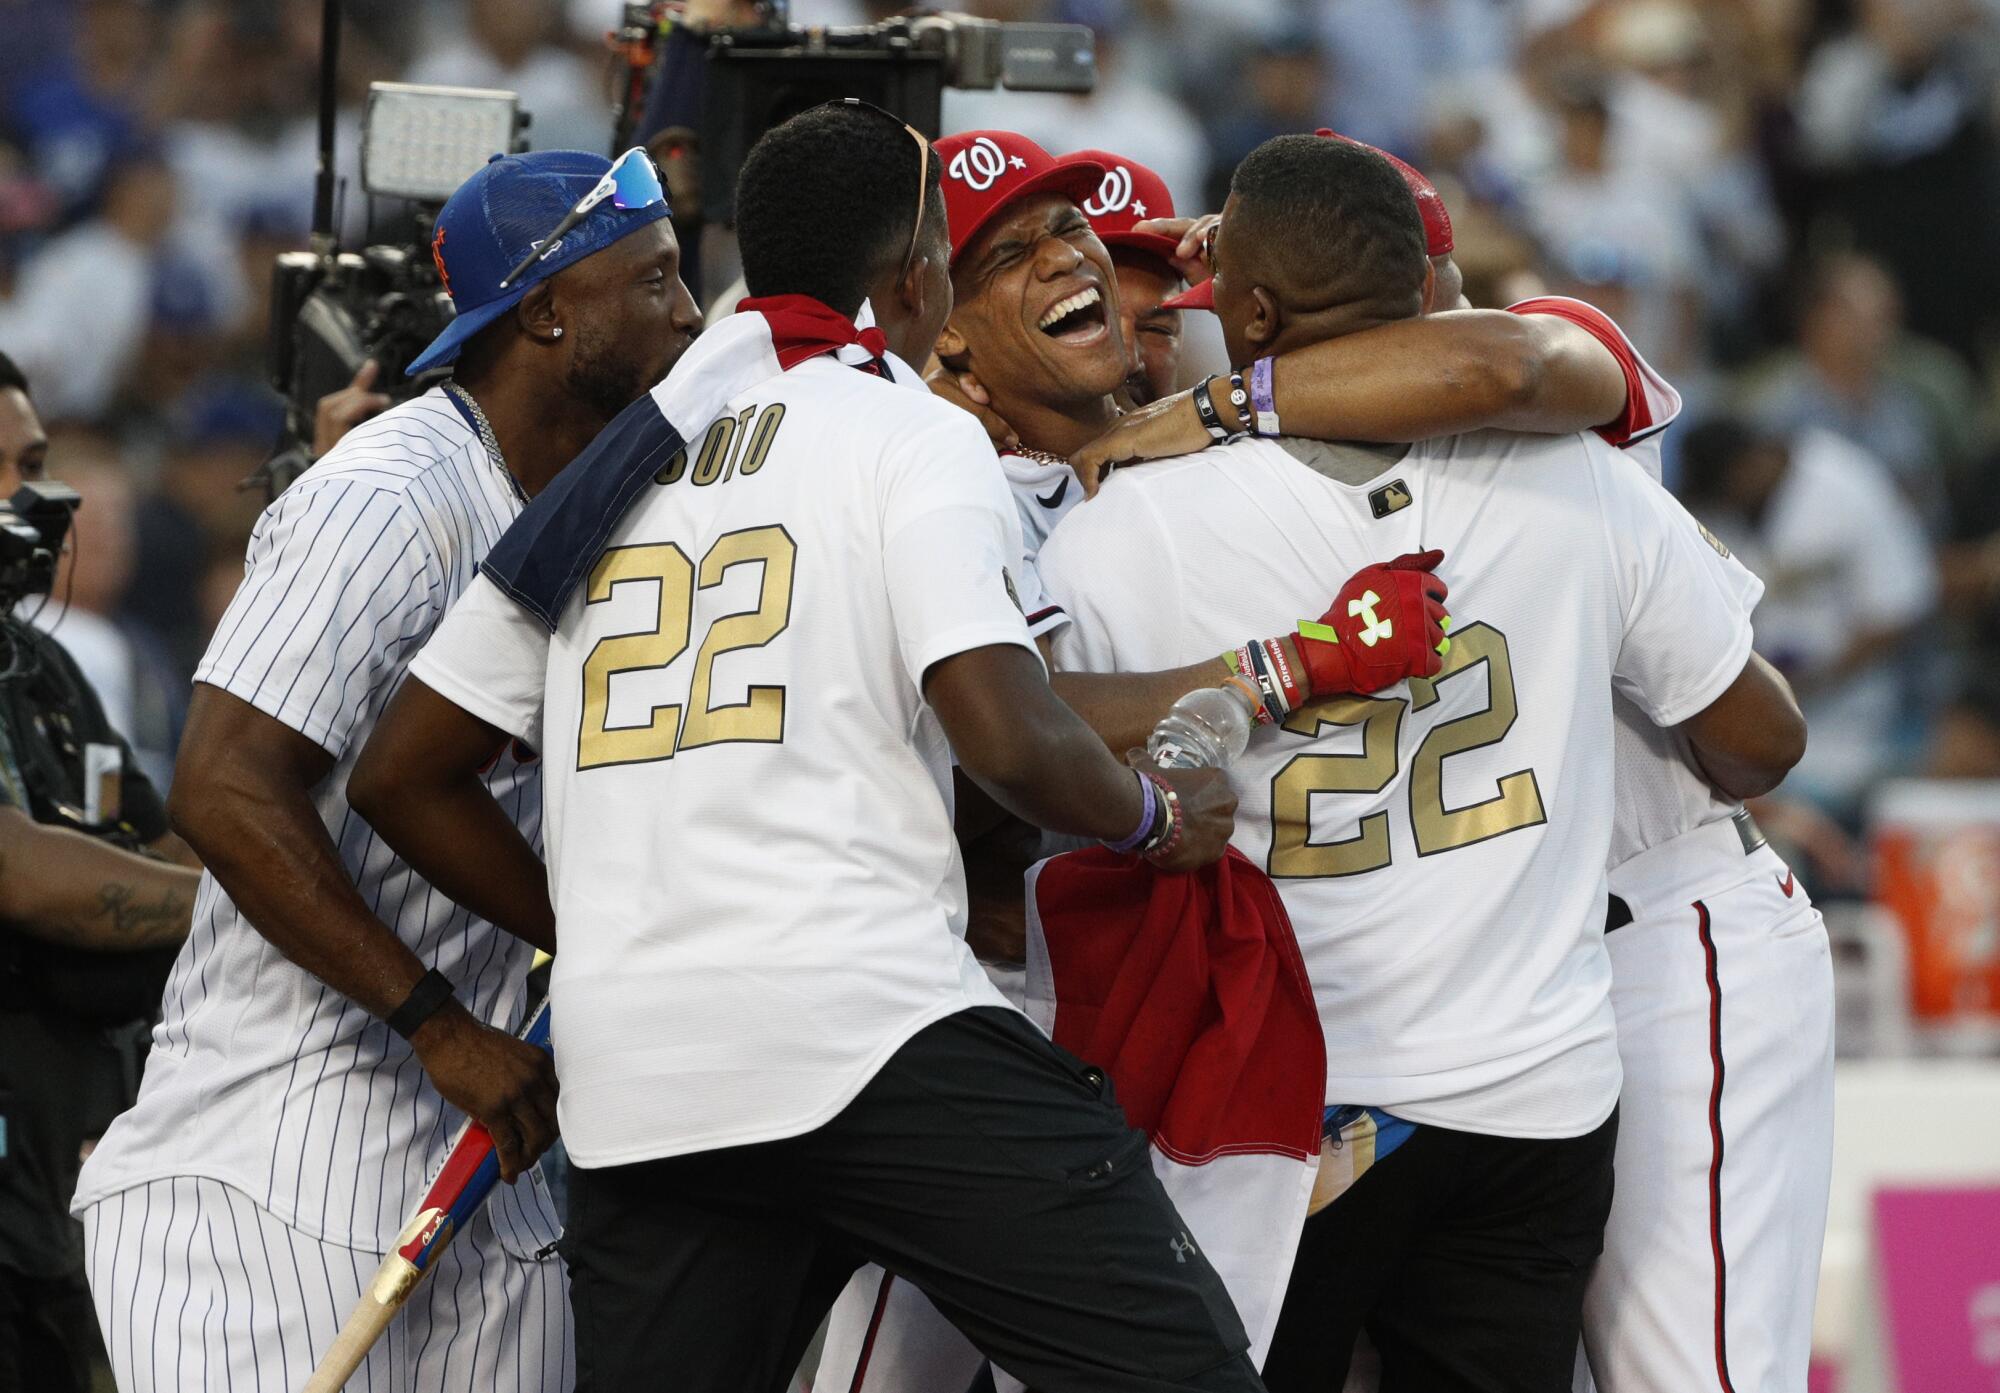 Juan Soto is swarmed by teammates after his derby triumph.